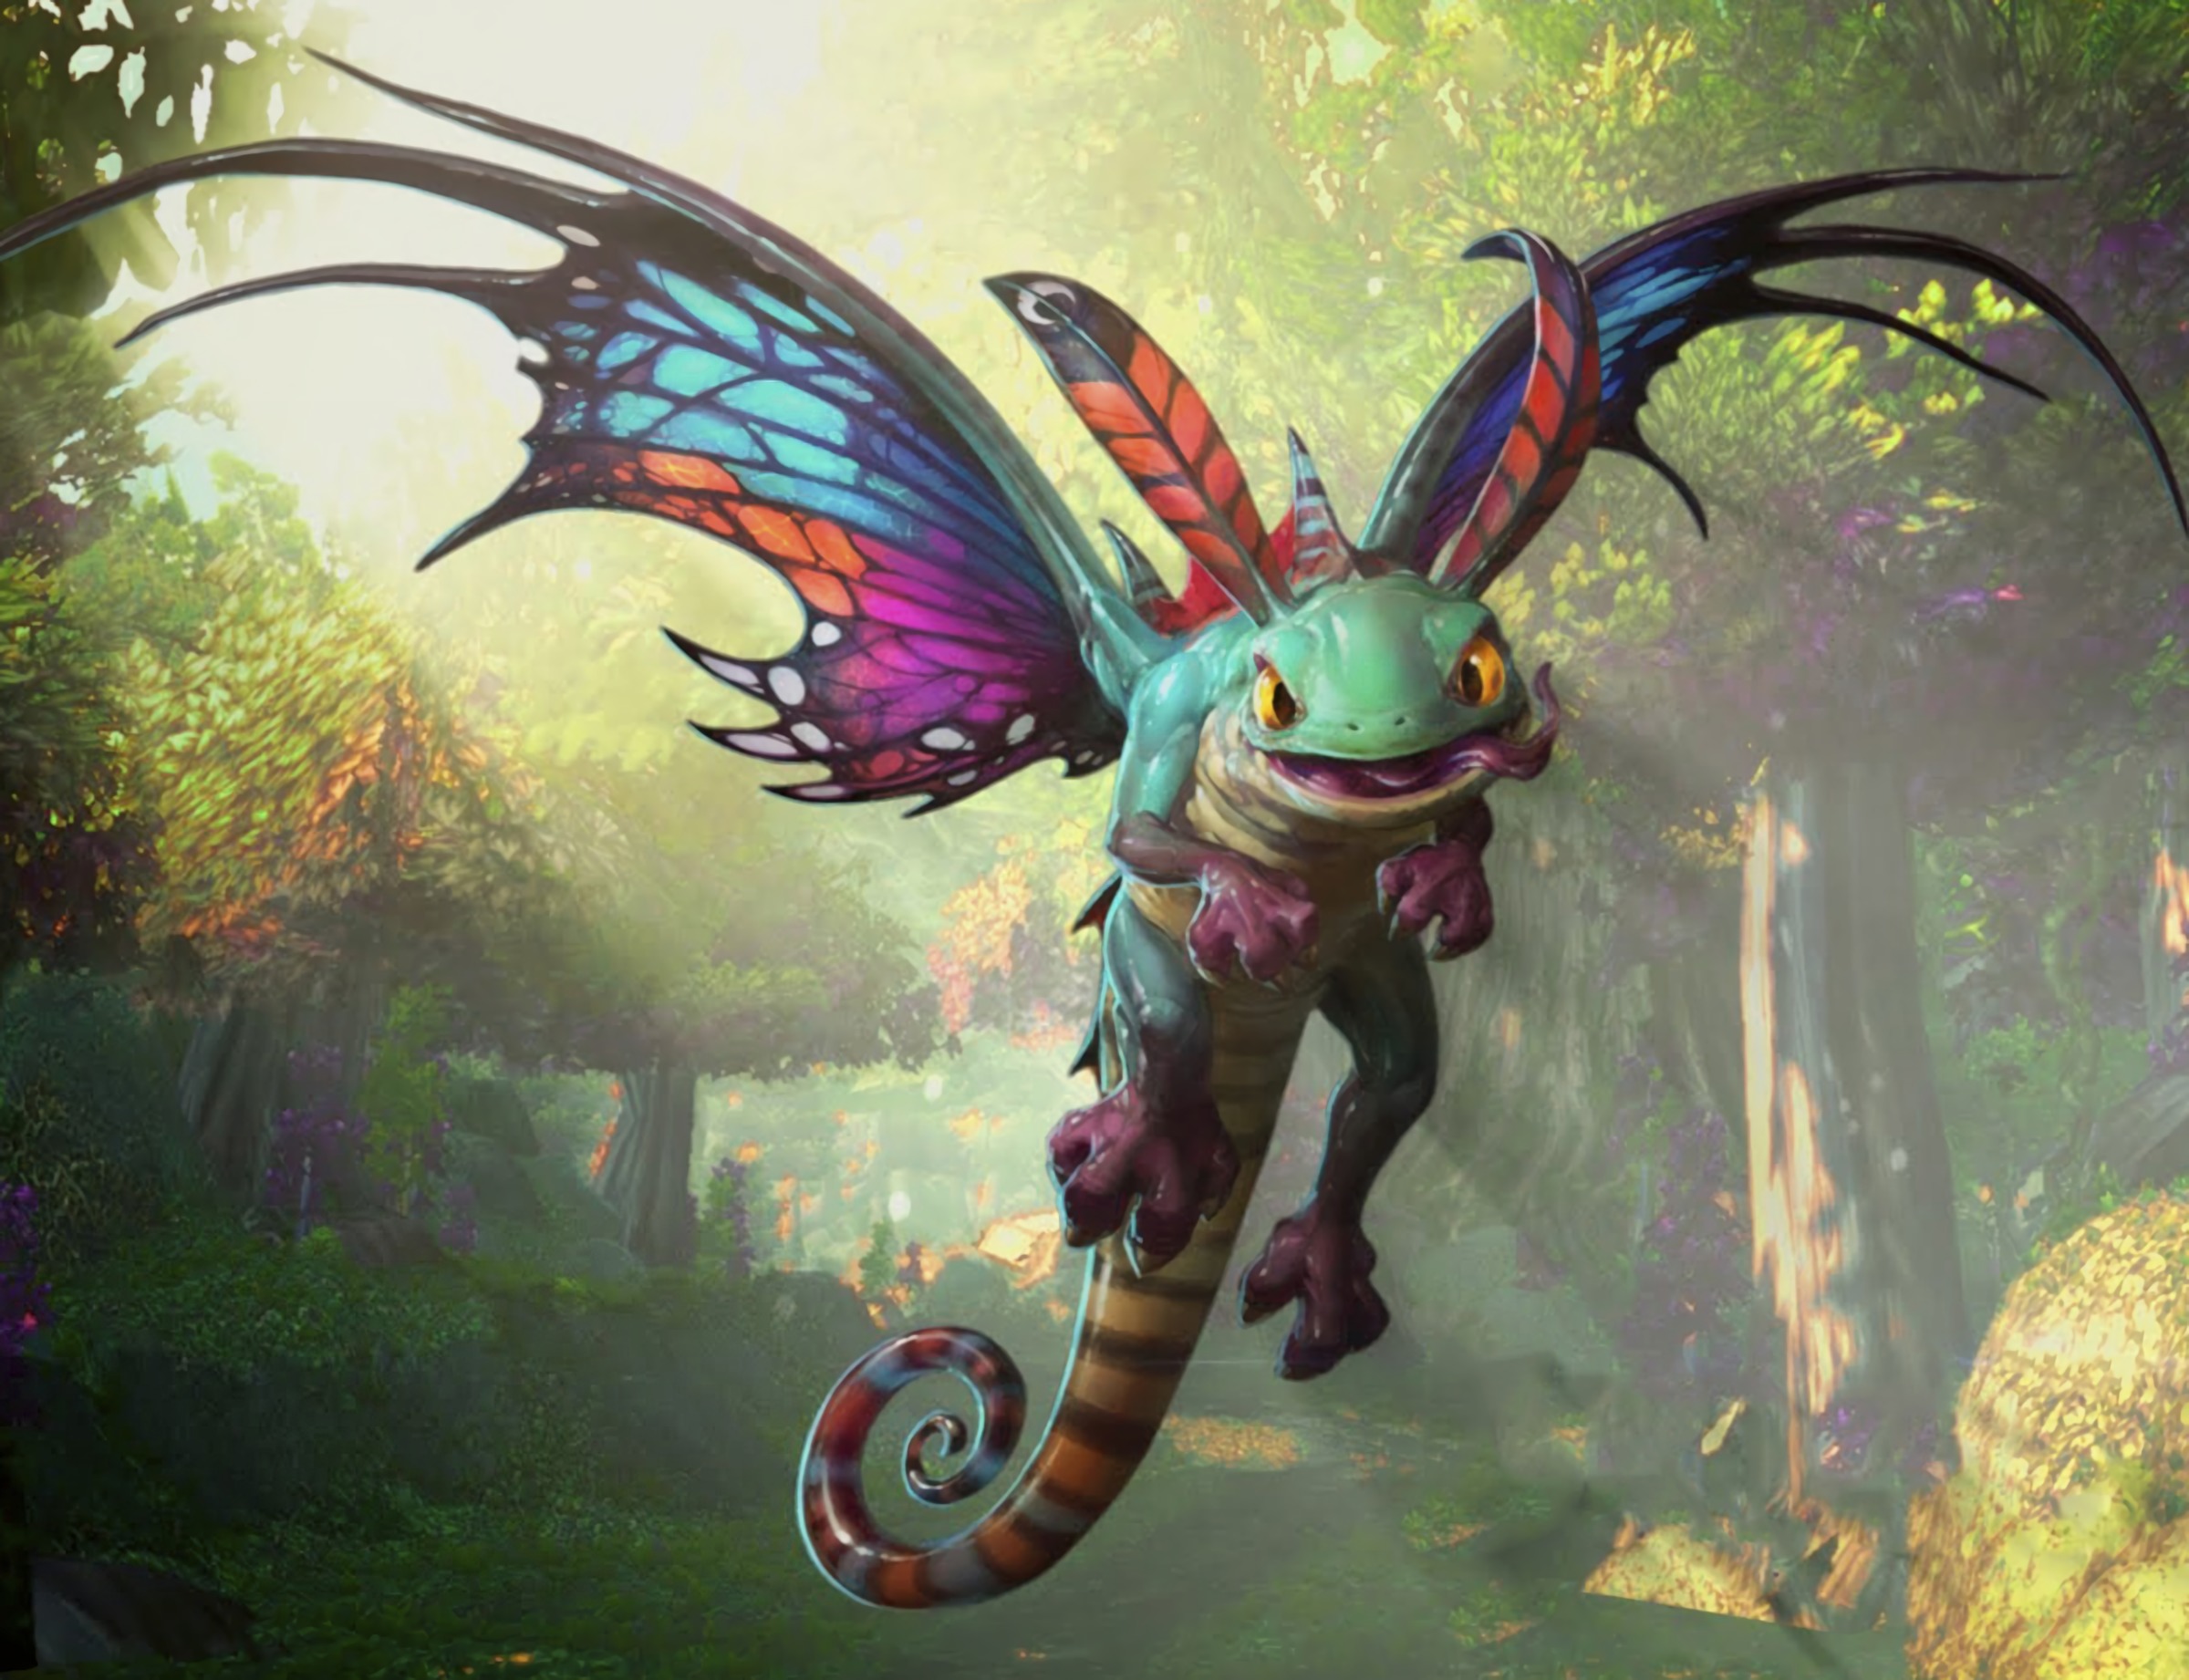 Hearthstone: New Classic Legendary, Brightwing revealed